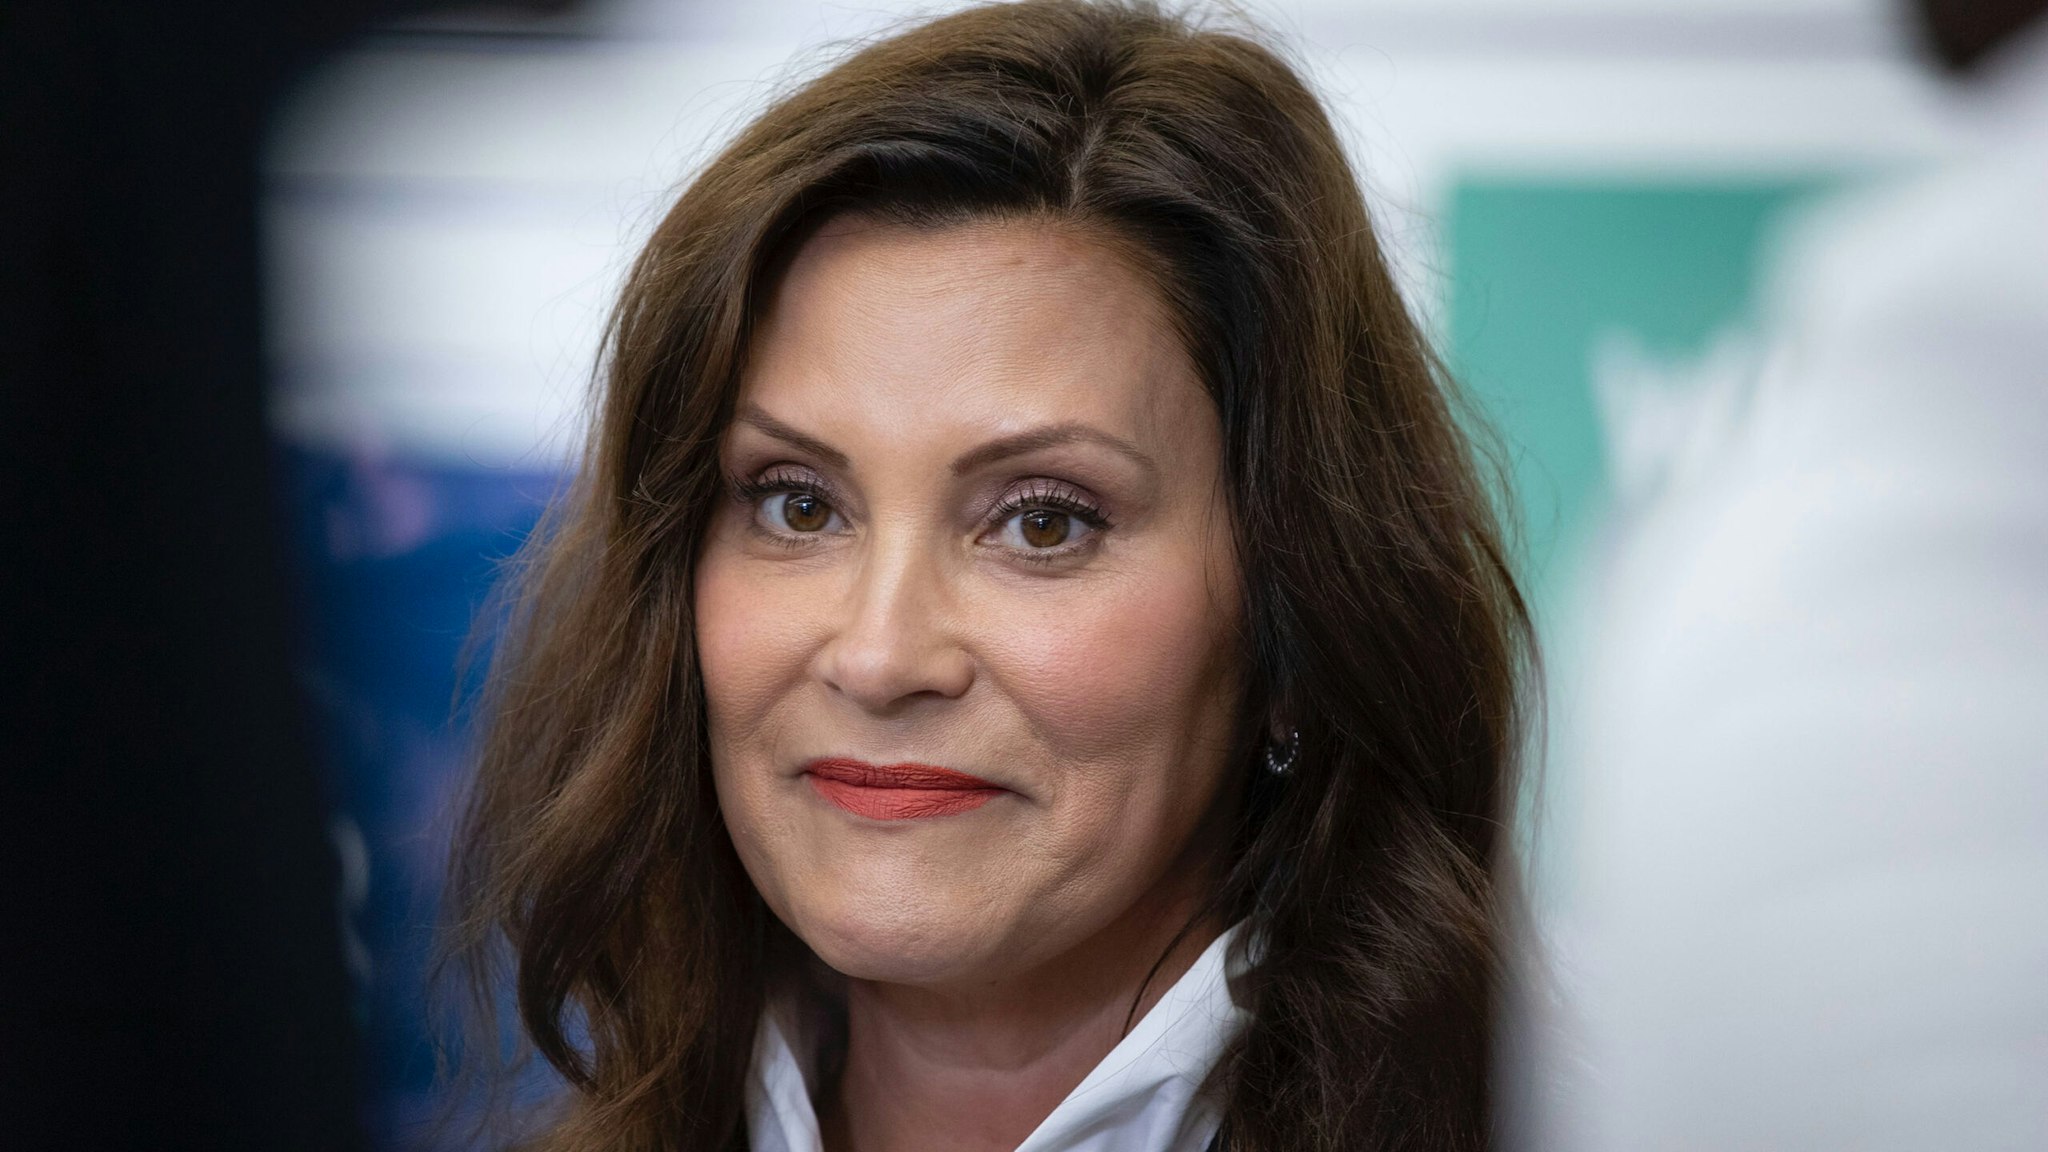 Michigan Governor Gretchen Whitmer meets with volunteers for canvass kickoffs on Michigan Primary Election Day on August 2, 2022 in Grand Rapids, Michigan.